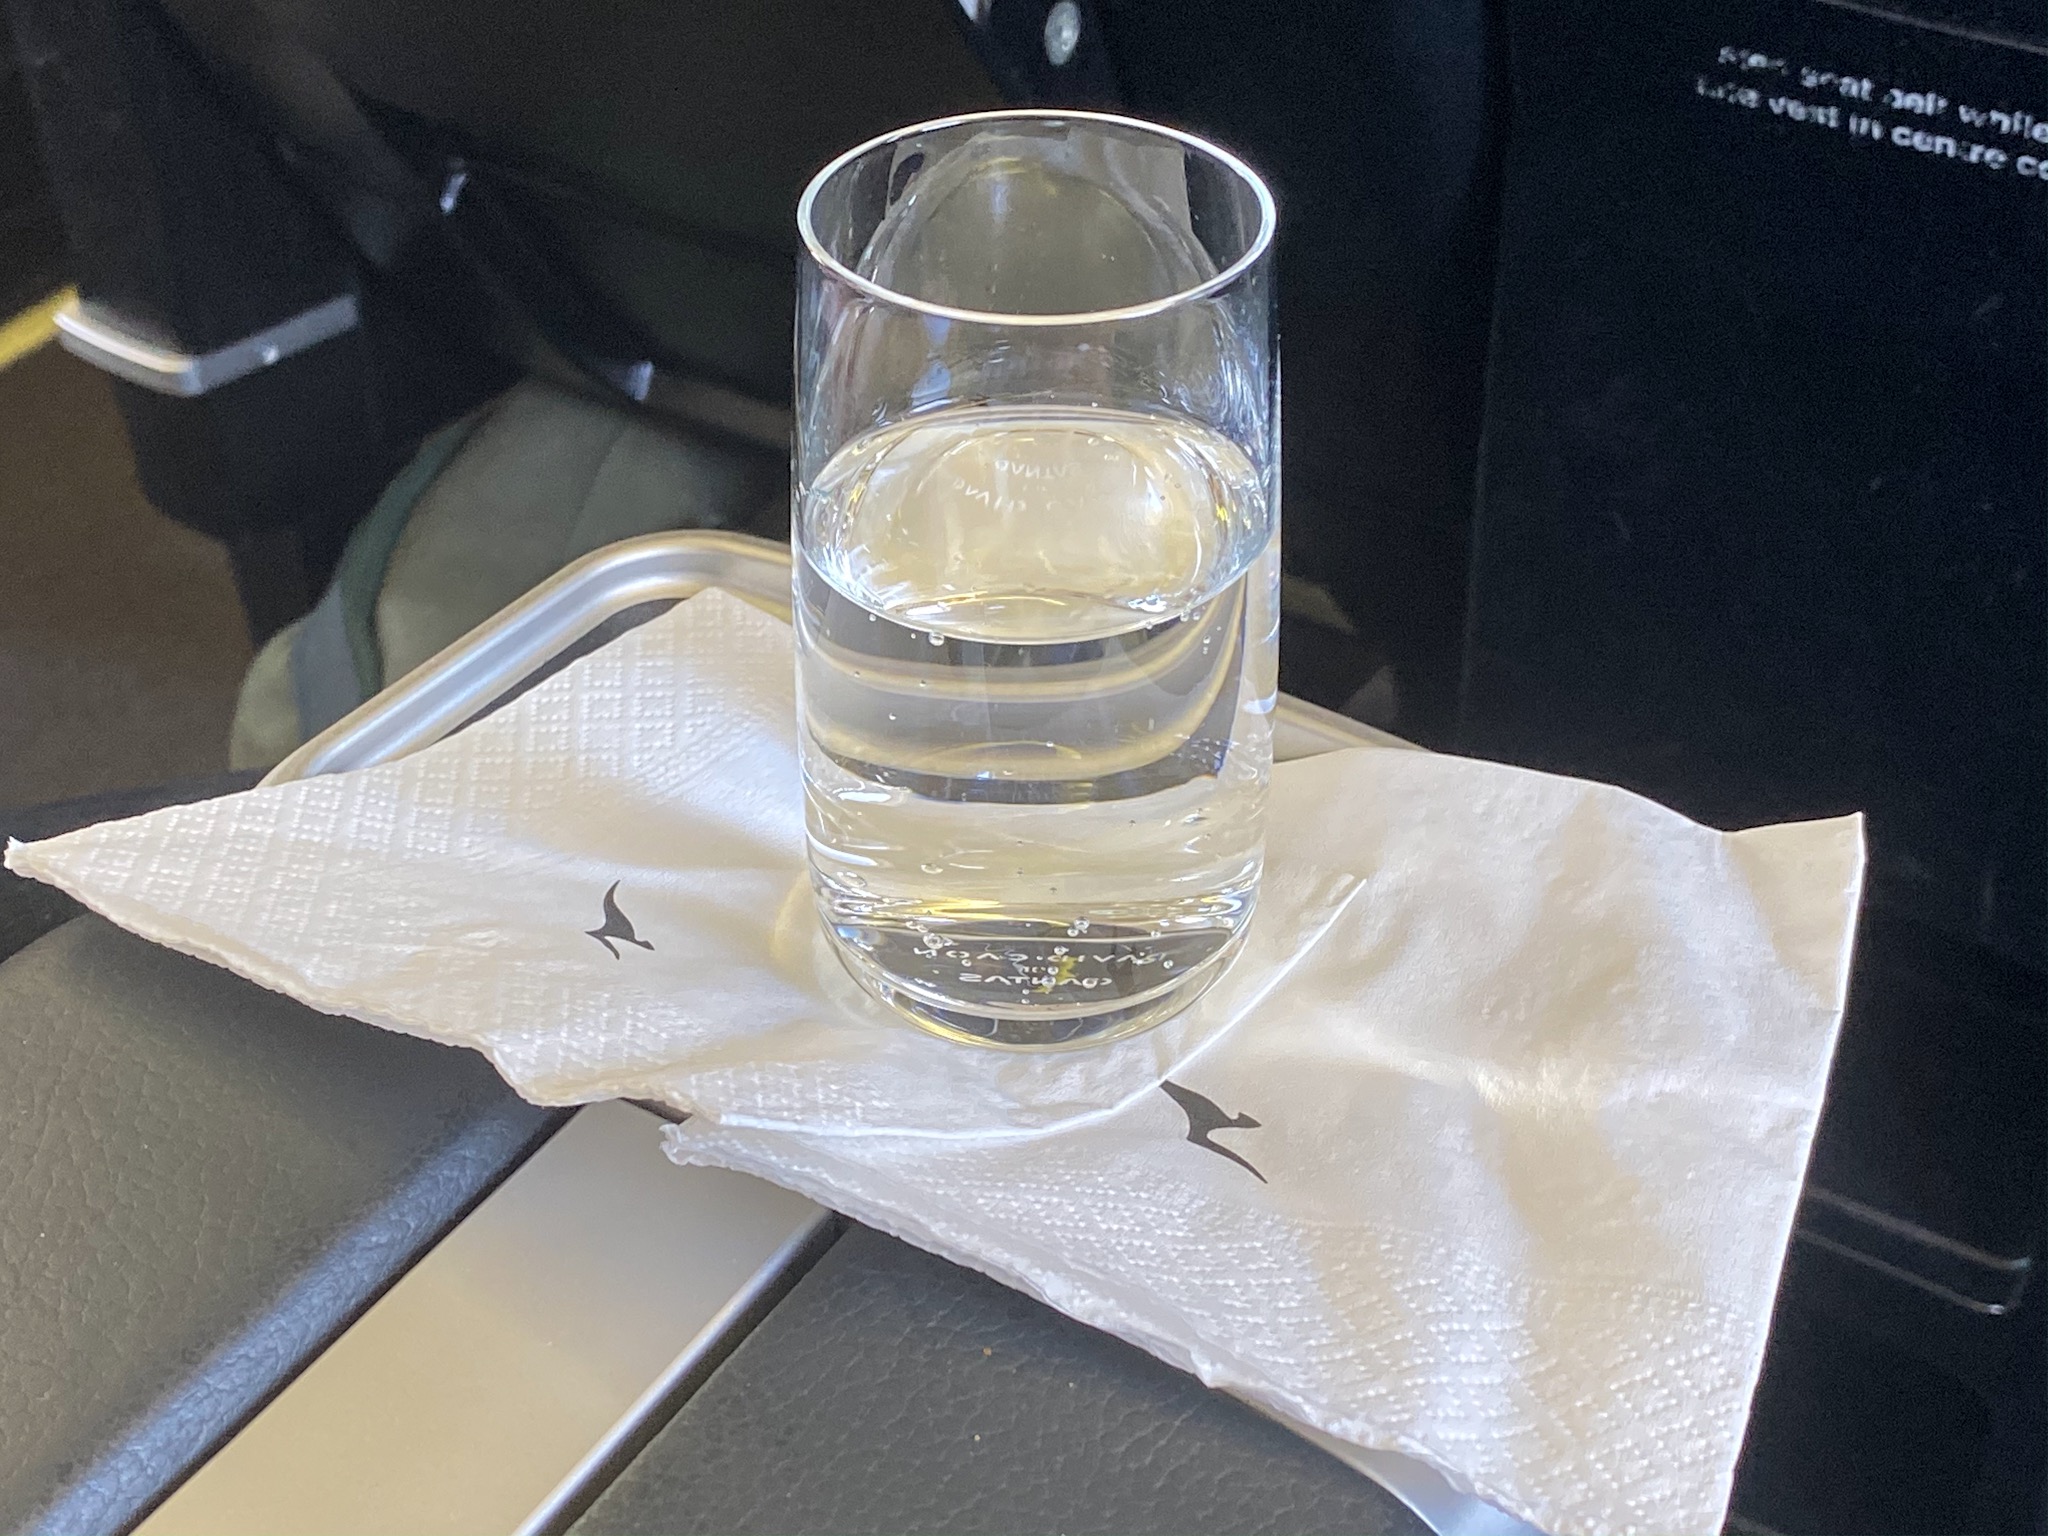 a glass of water on a napkin on a tray